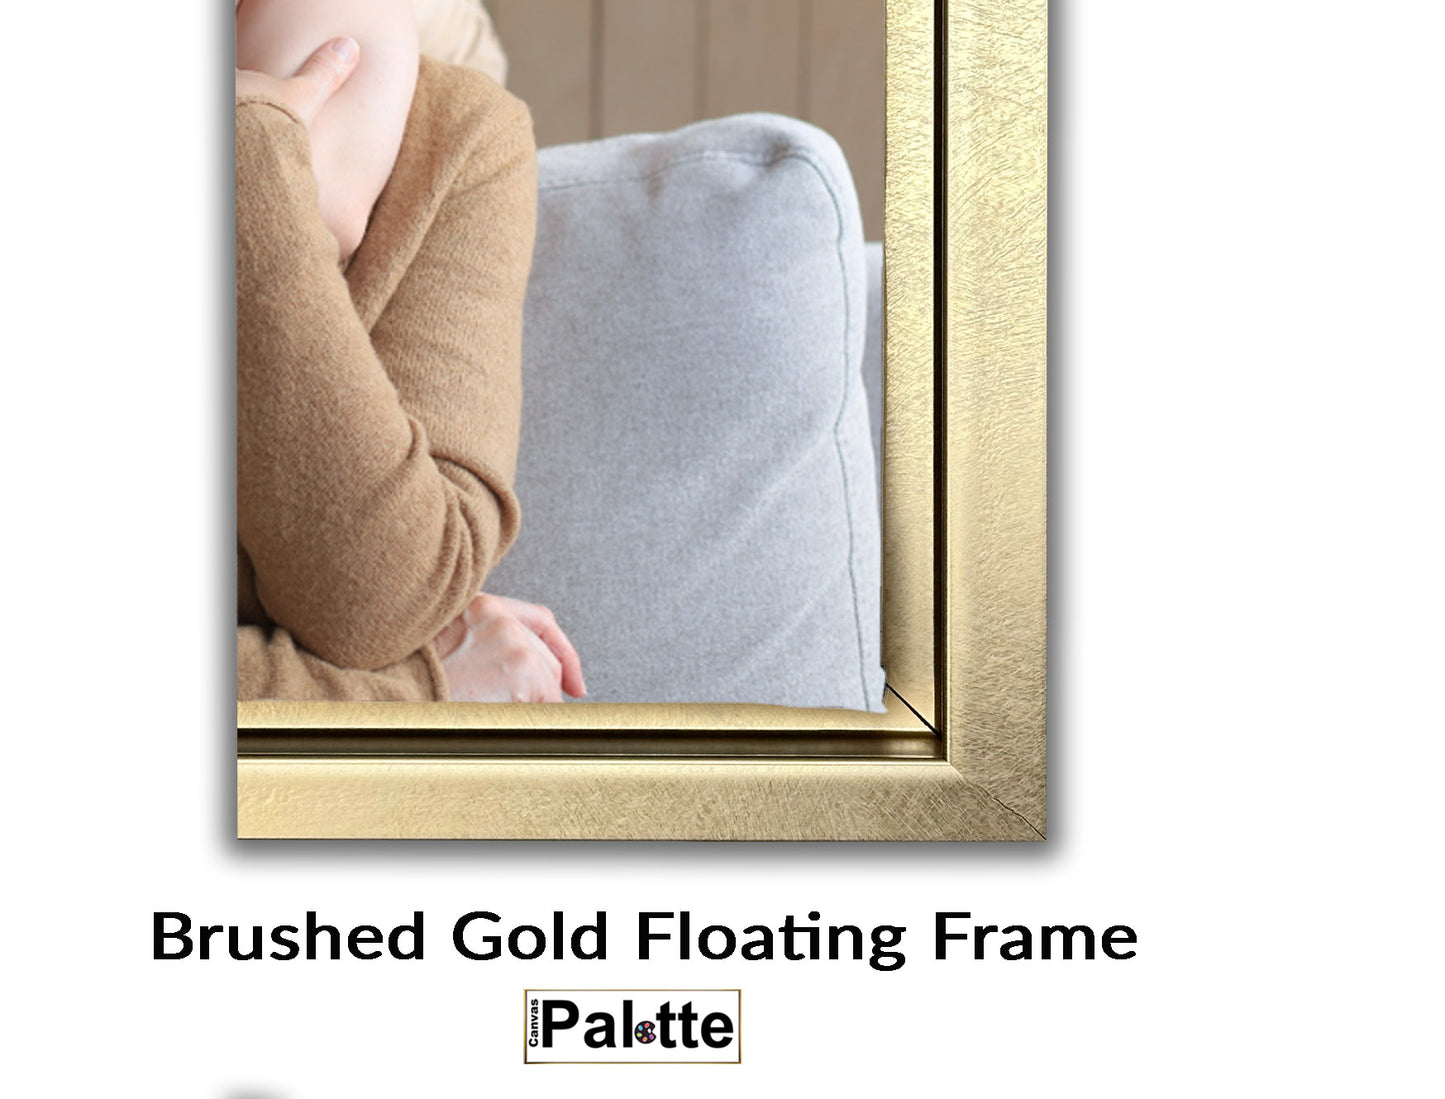 Example of a brushed gold floating border for canvas printed on Canvas Palette